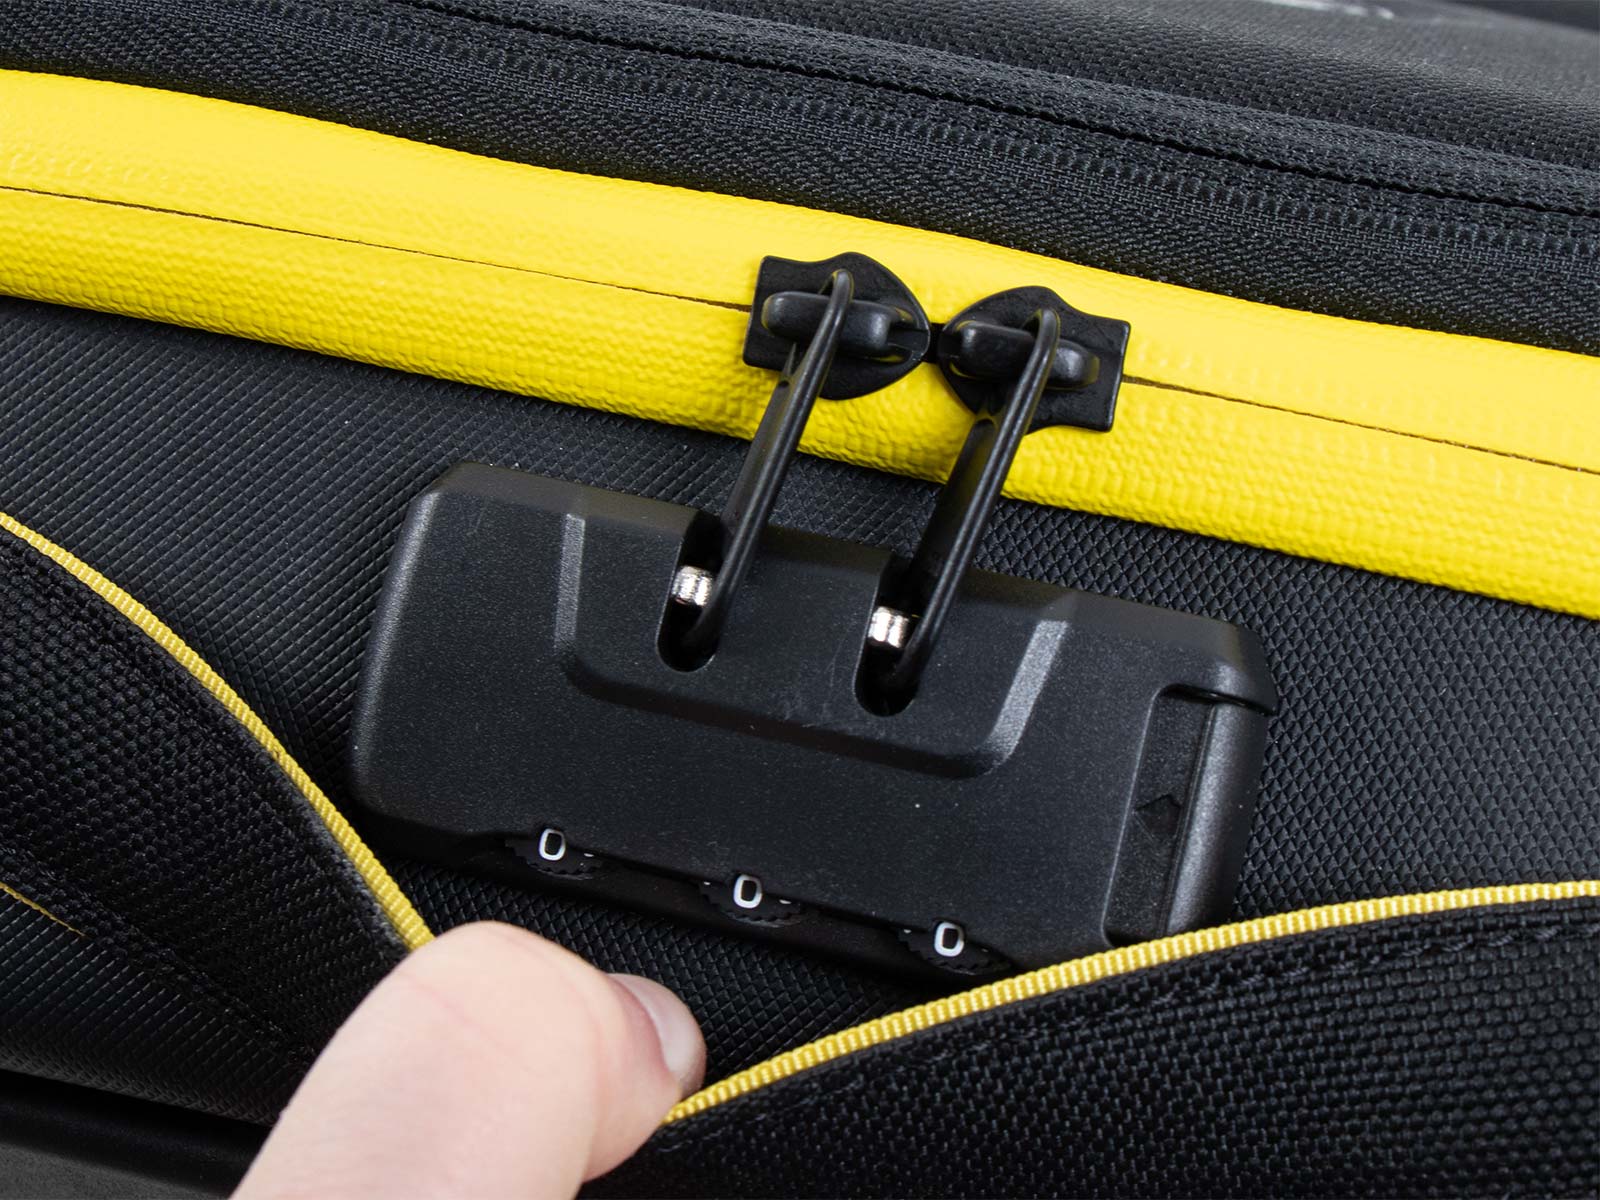 Royster Neo side bag set black/yellow for Hepco&Becker C-Bow holder